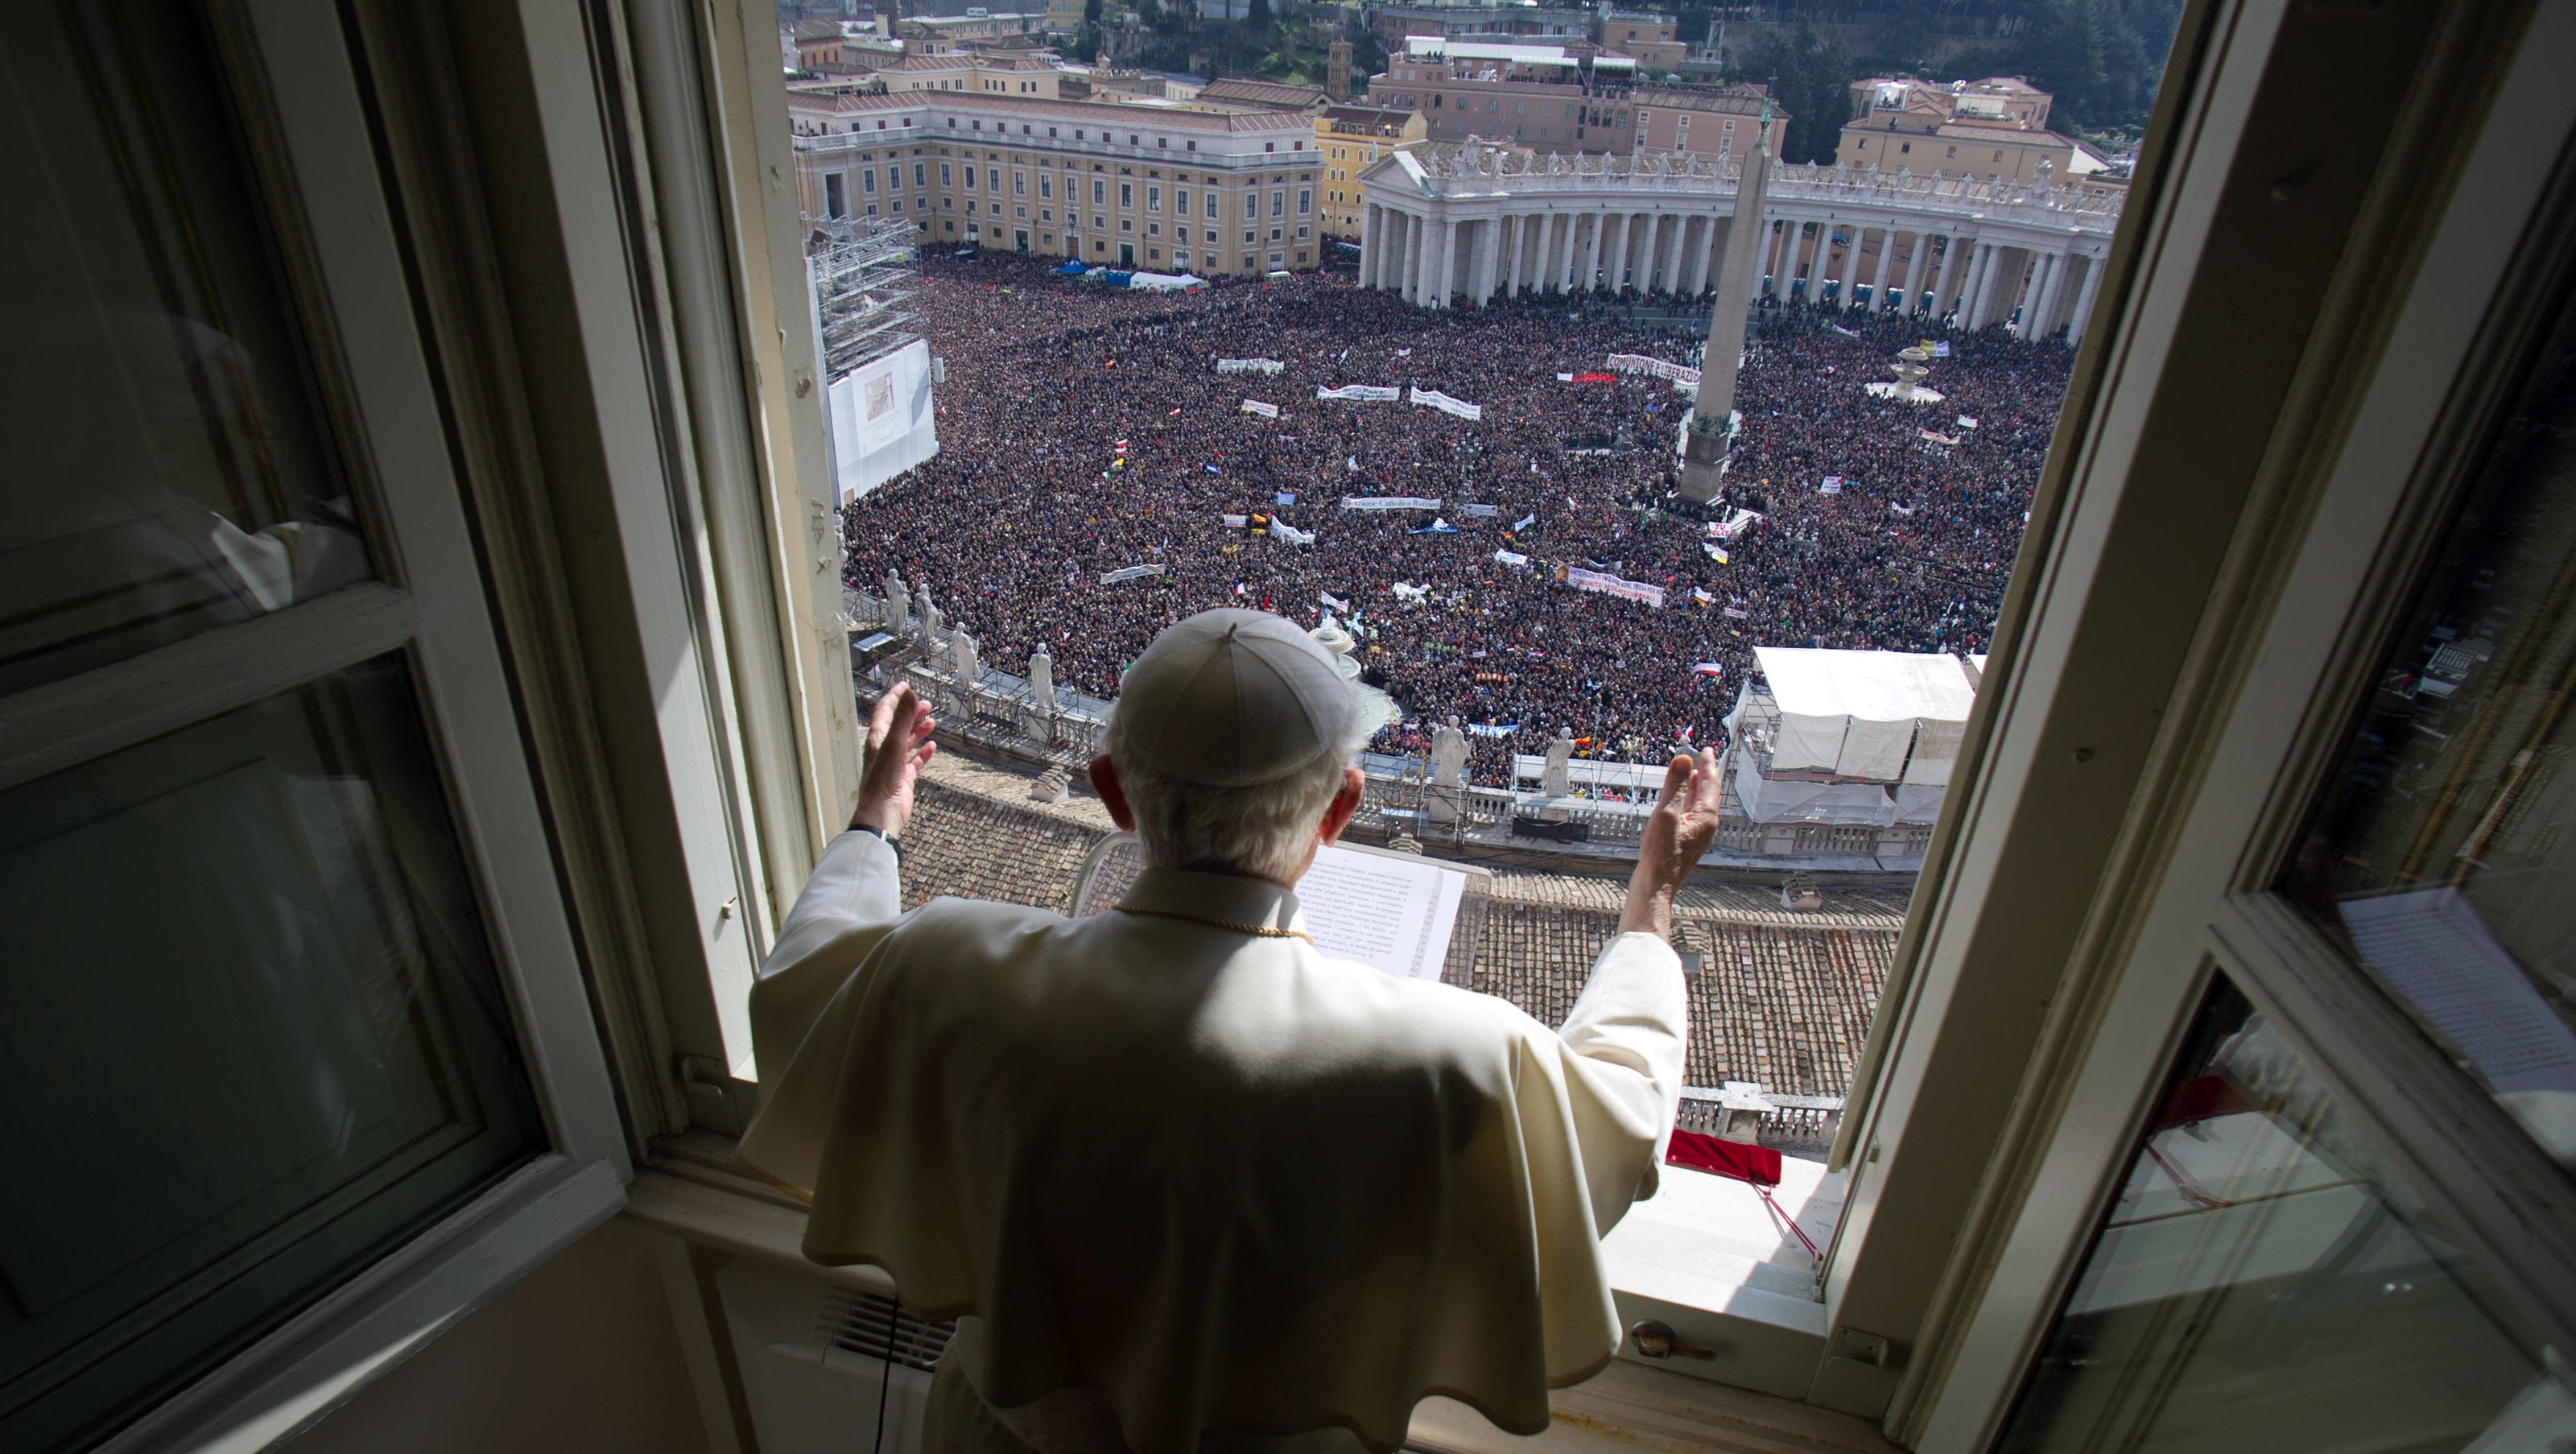 Pope's last Sunday blessing draws crowd at Vatican